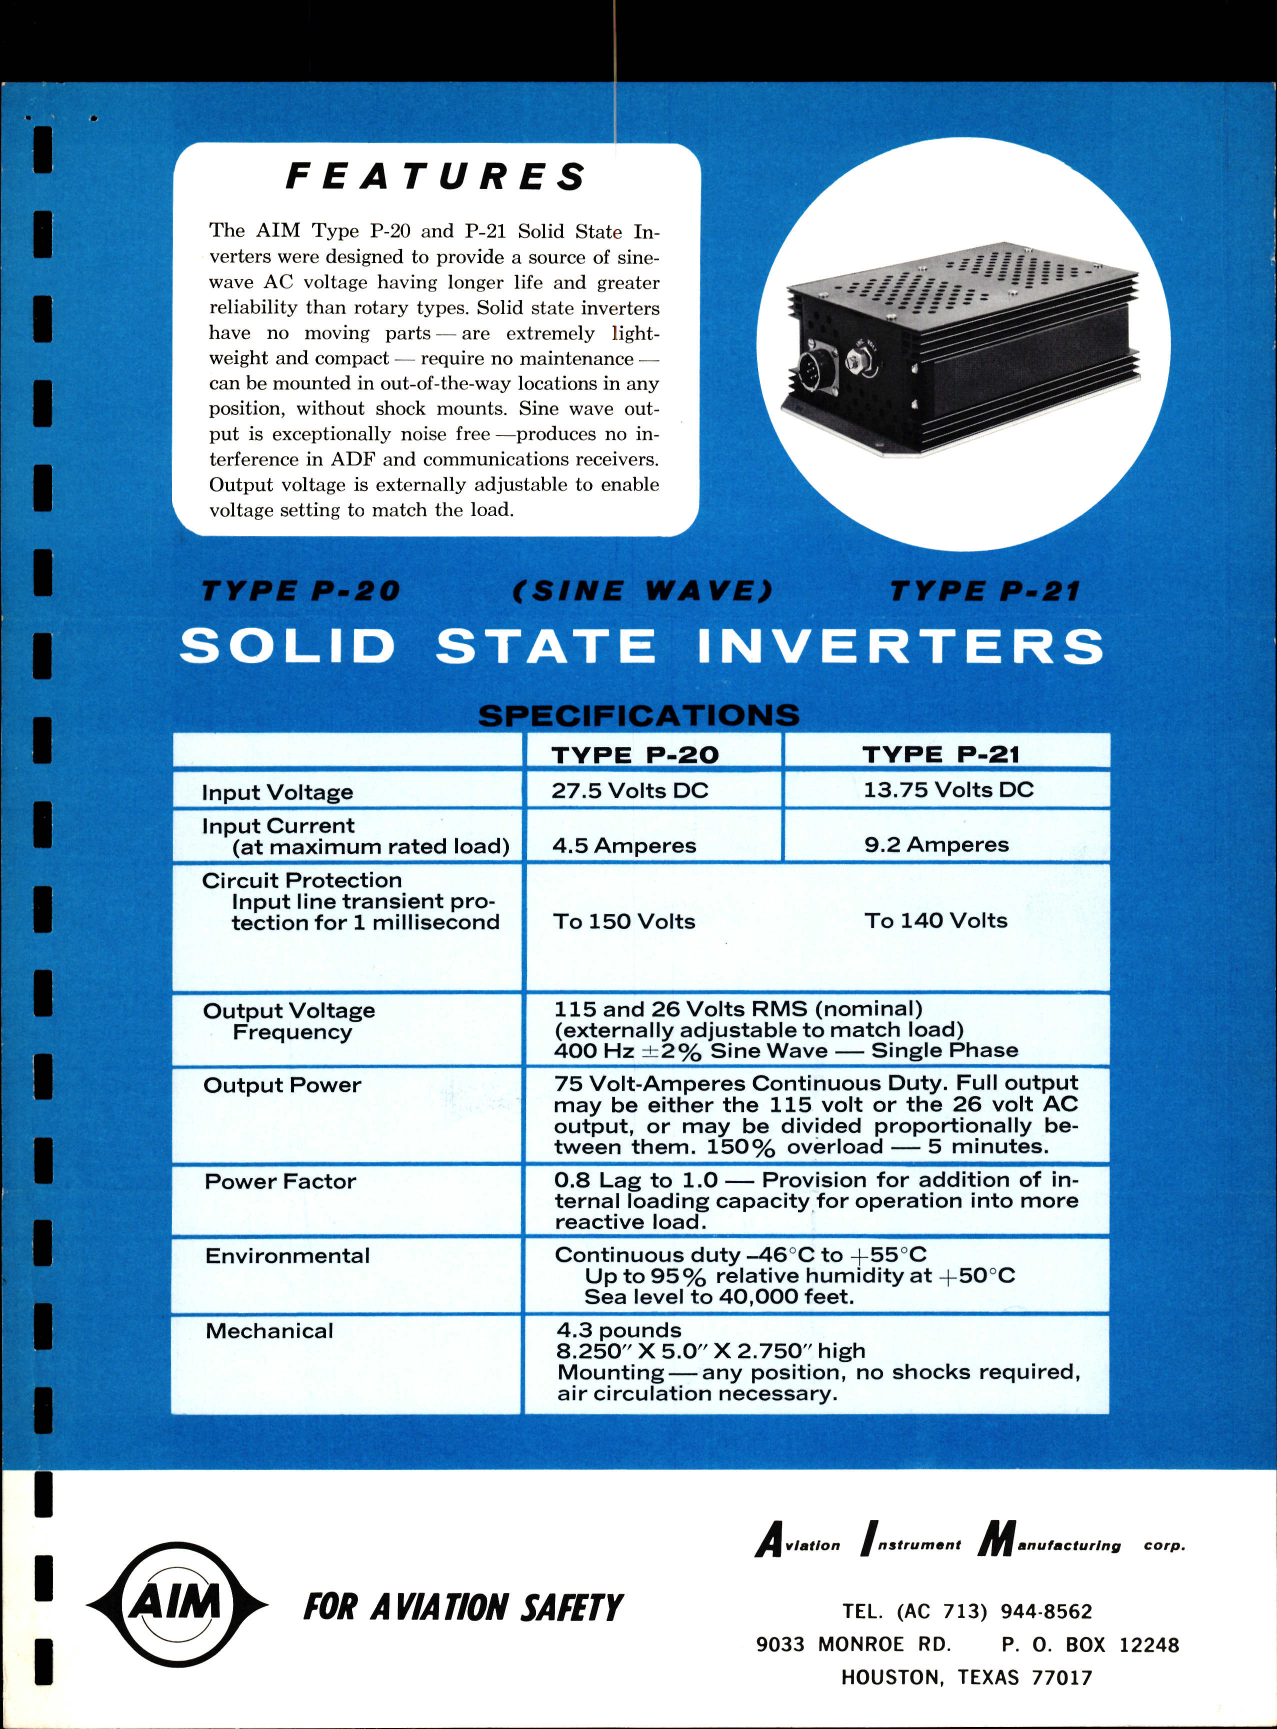 Sample page 1 from AirCorps Library document: AIM Specifications for Type P-20 and P-21 (Sine Wave) Solid State Inverters